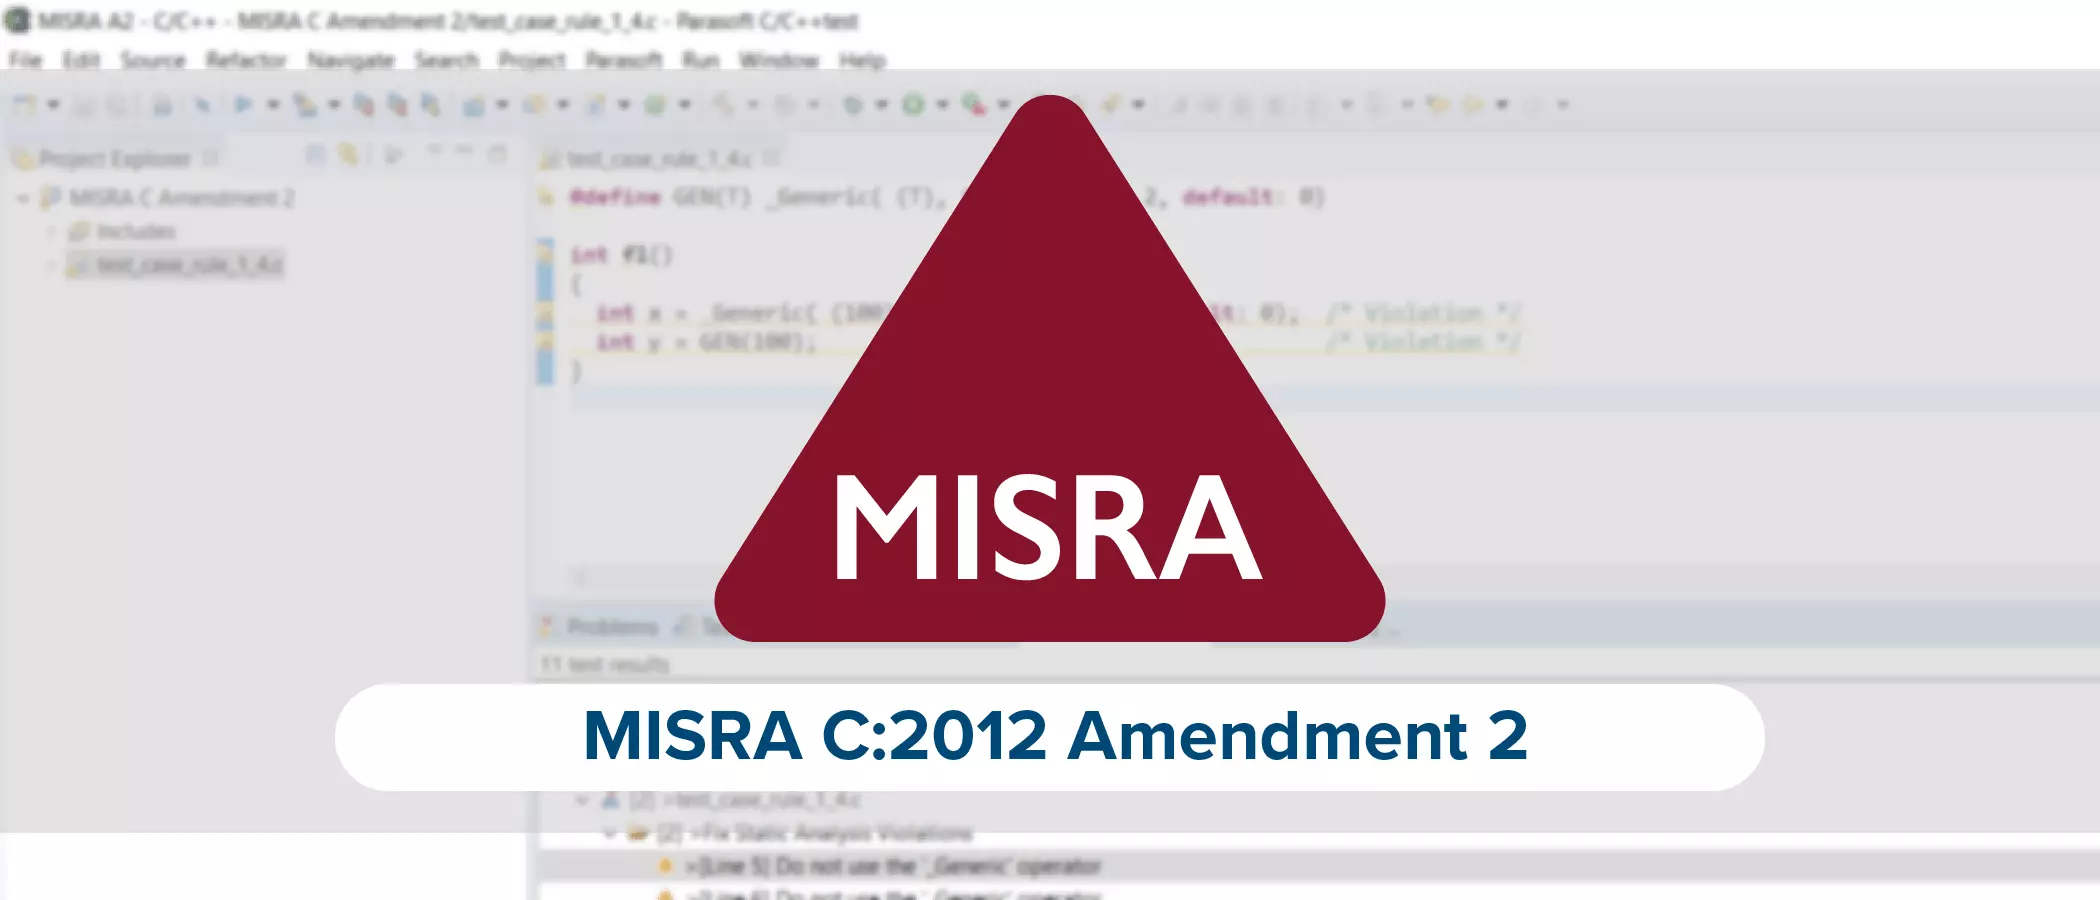 The Anticipated MISRA C:2012 Amendment 2 Is Now Available